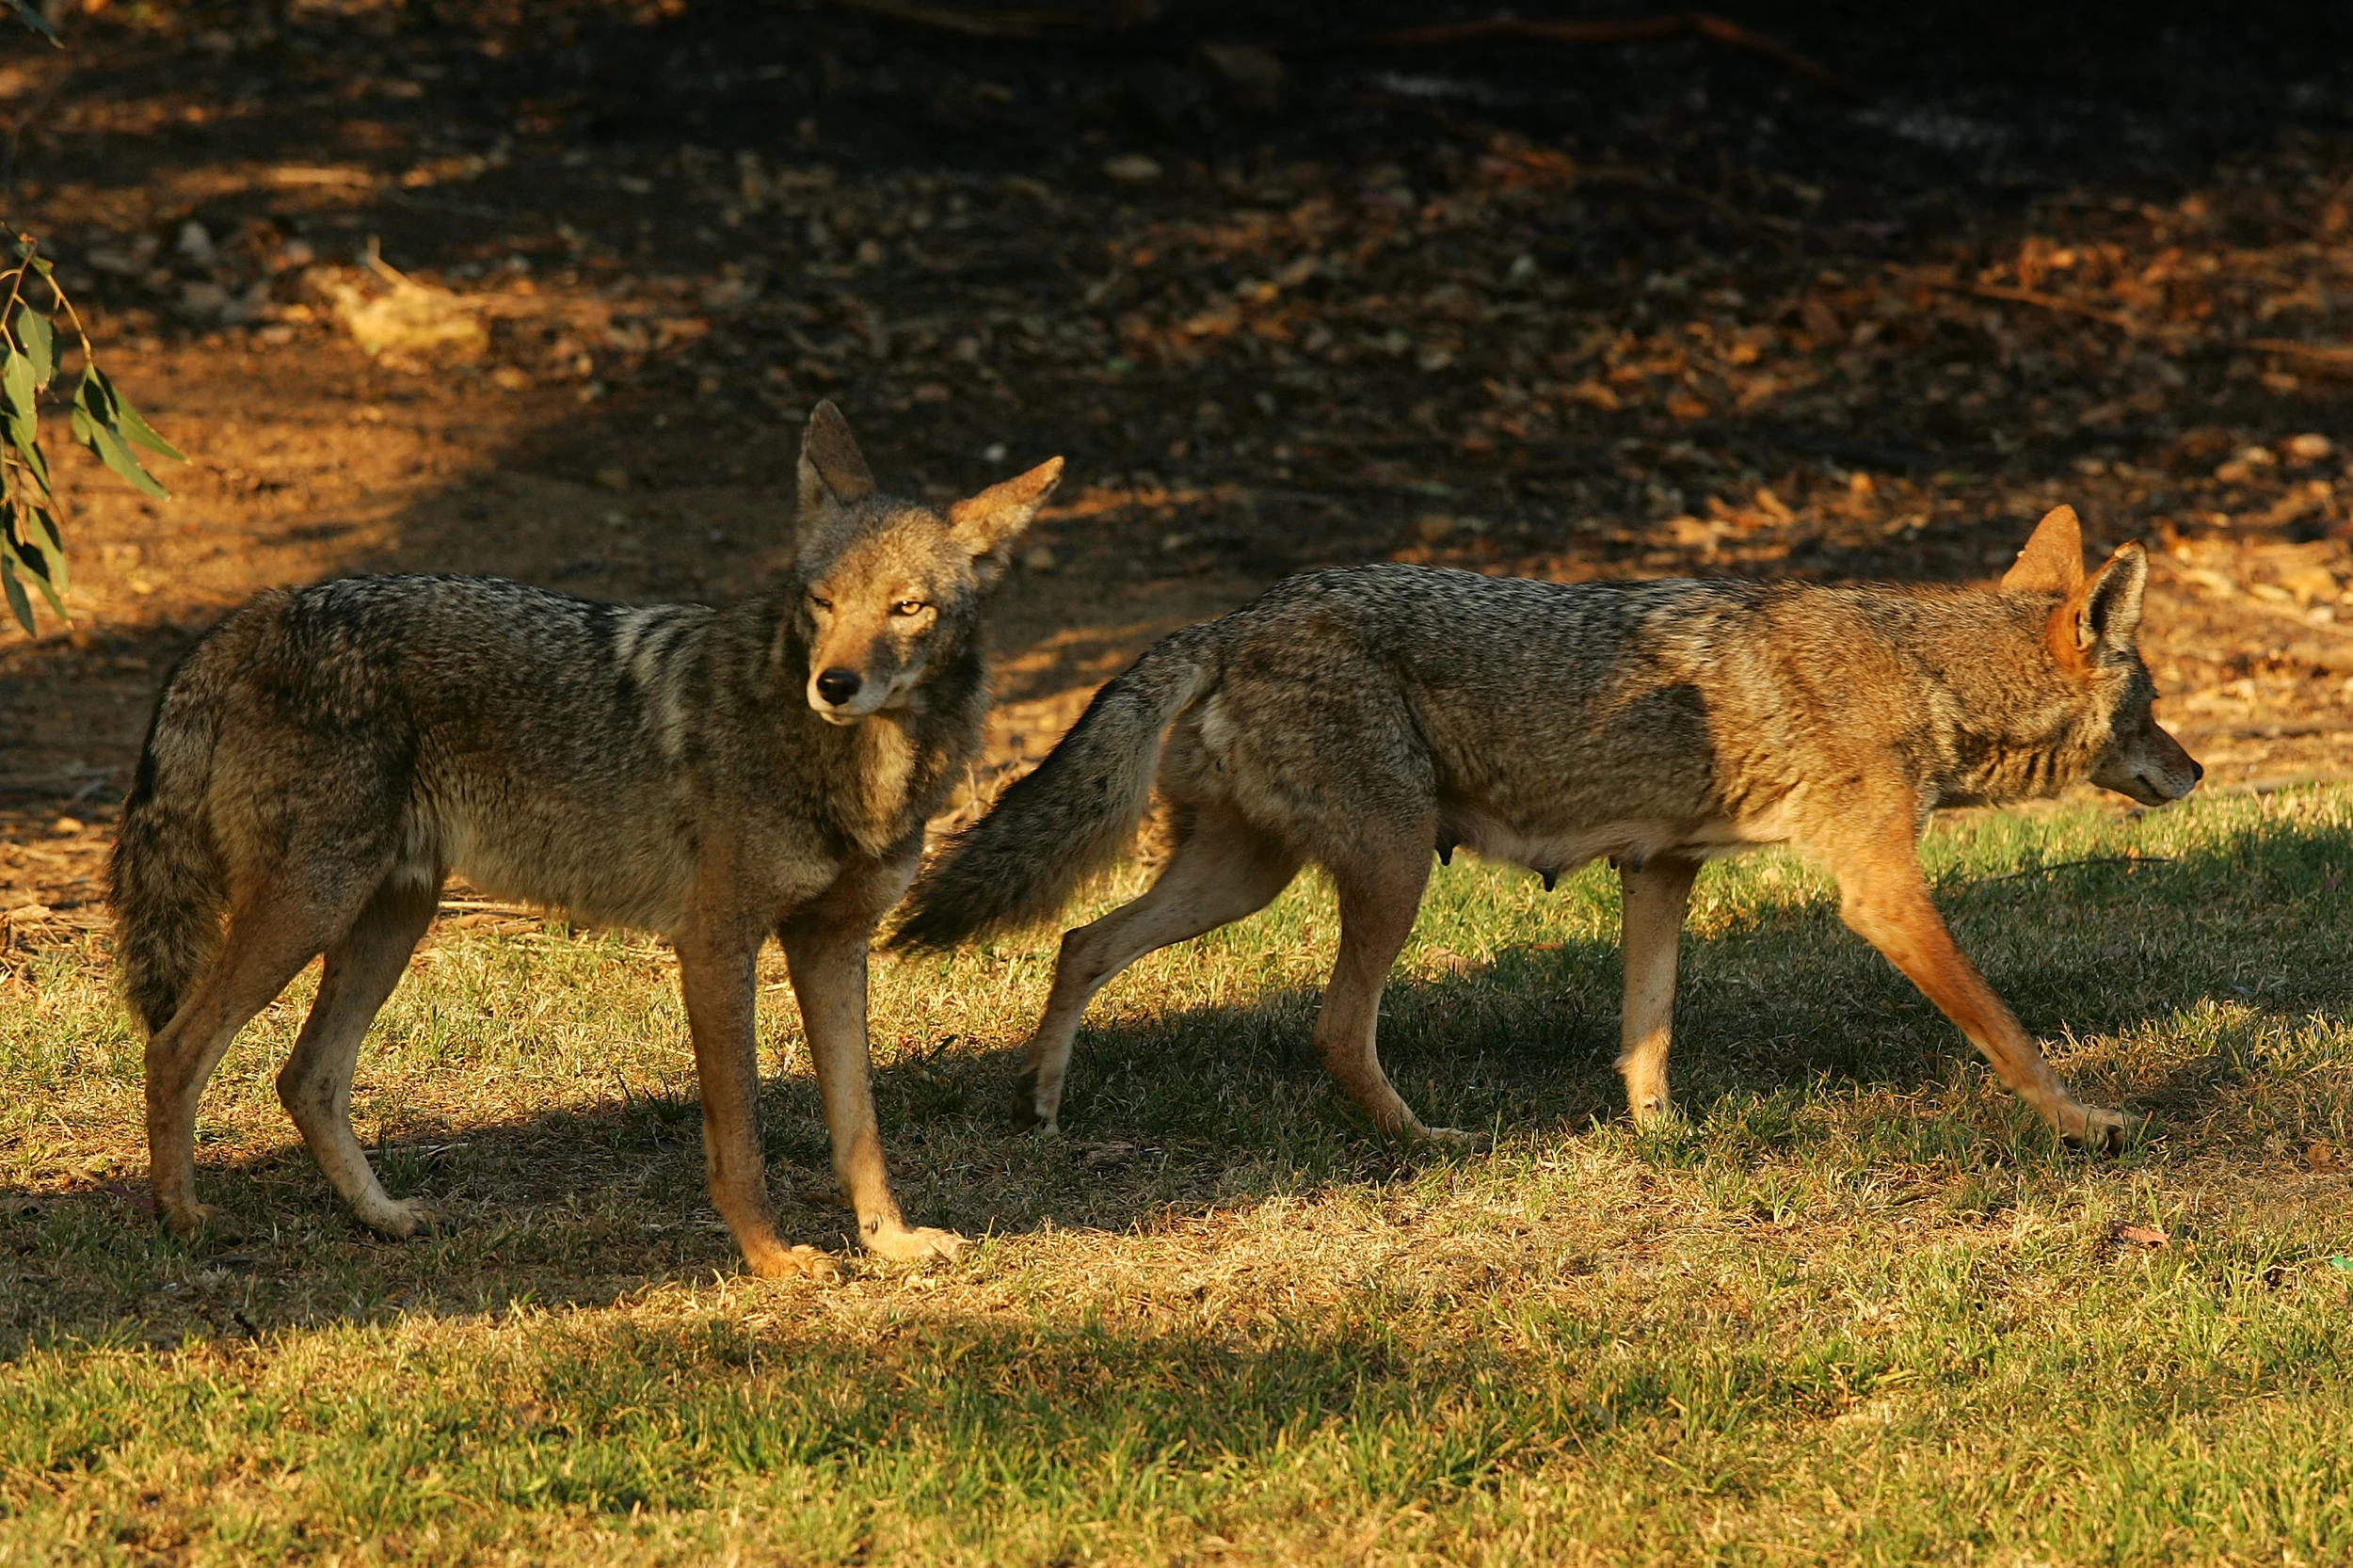 Real Brigantine - Coyotes are here to stay” was the